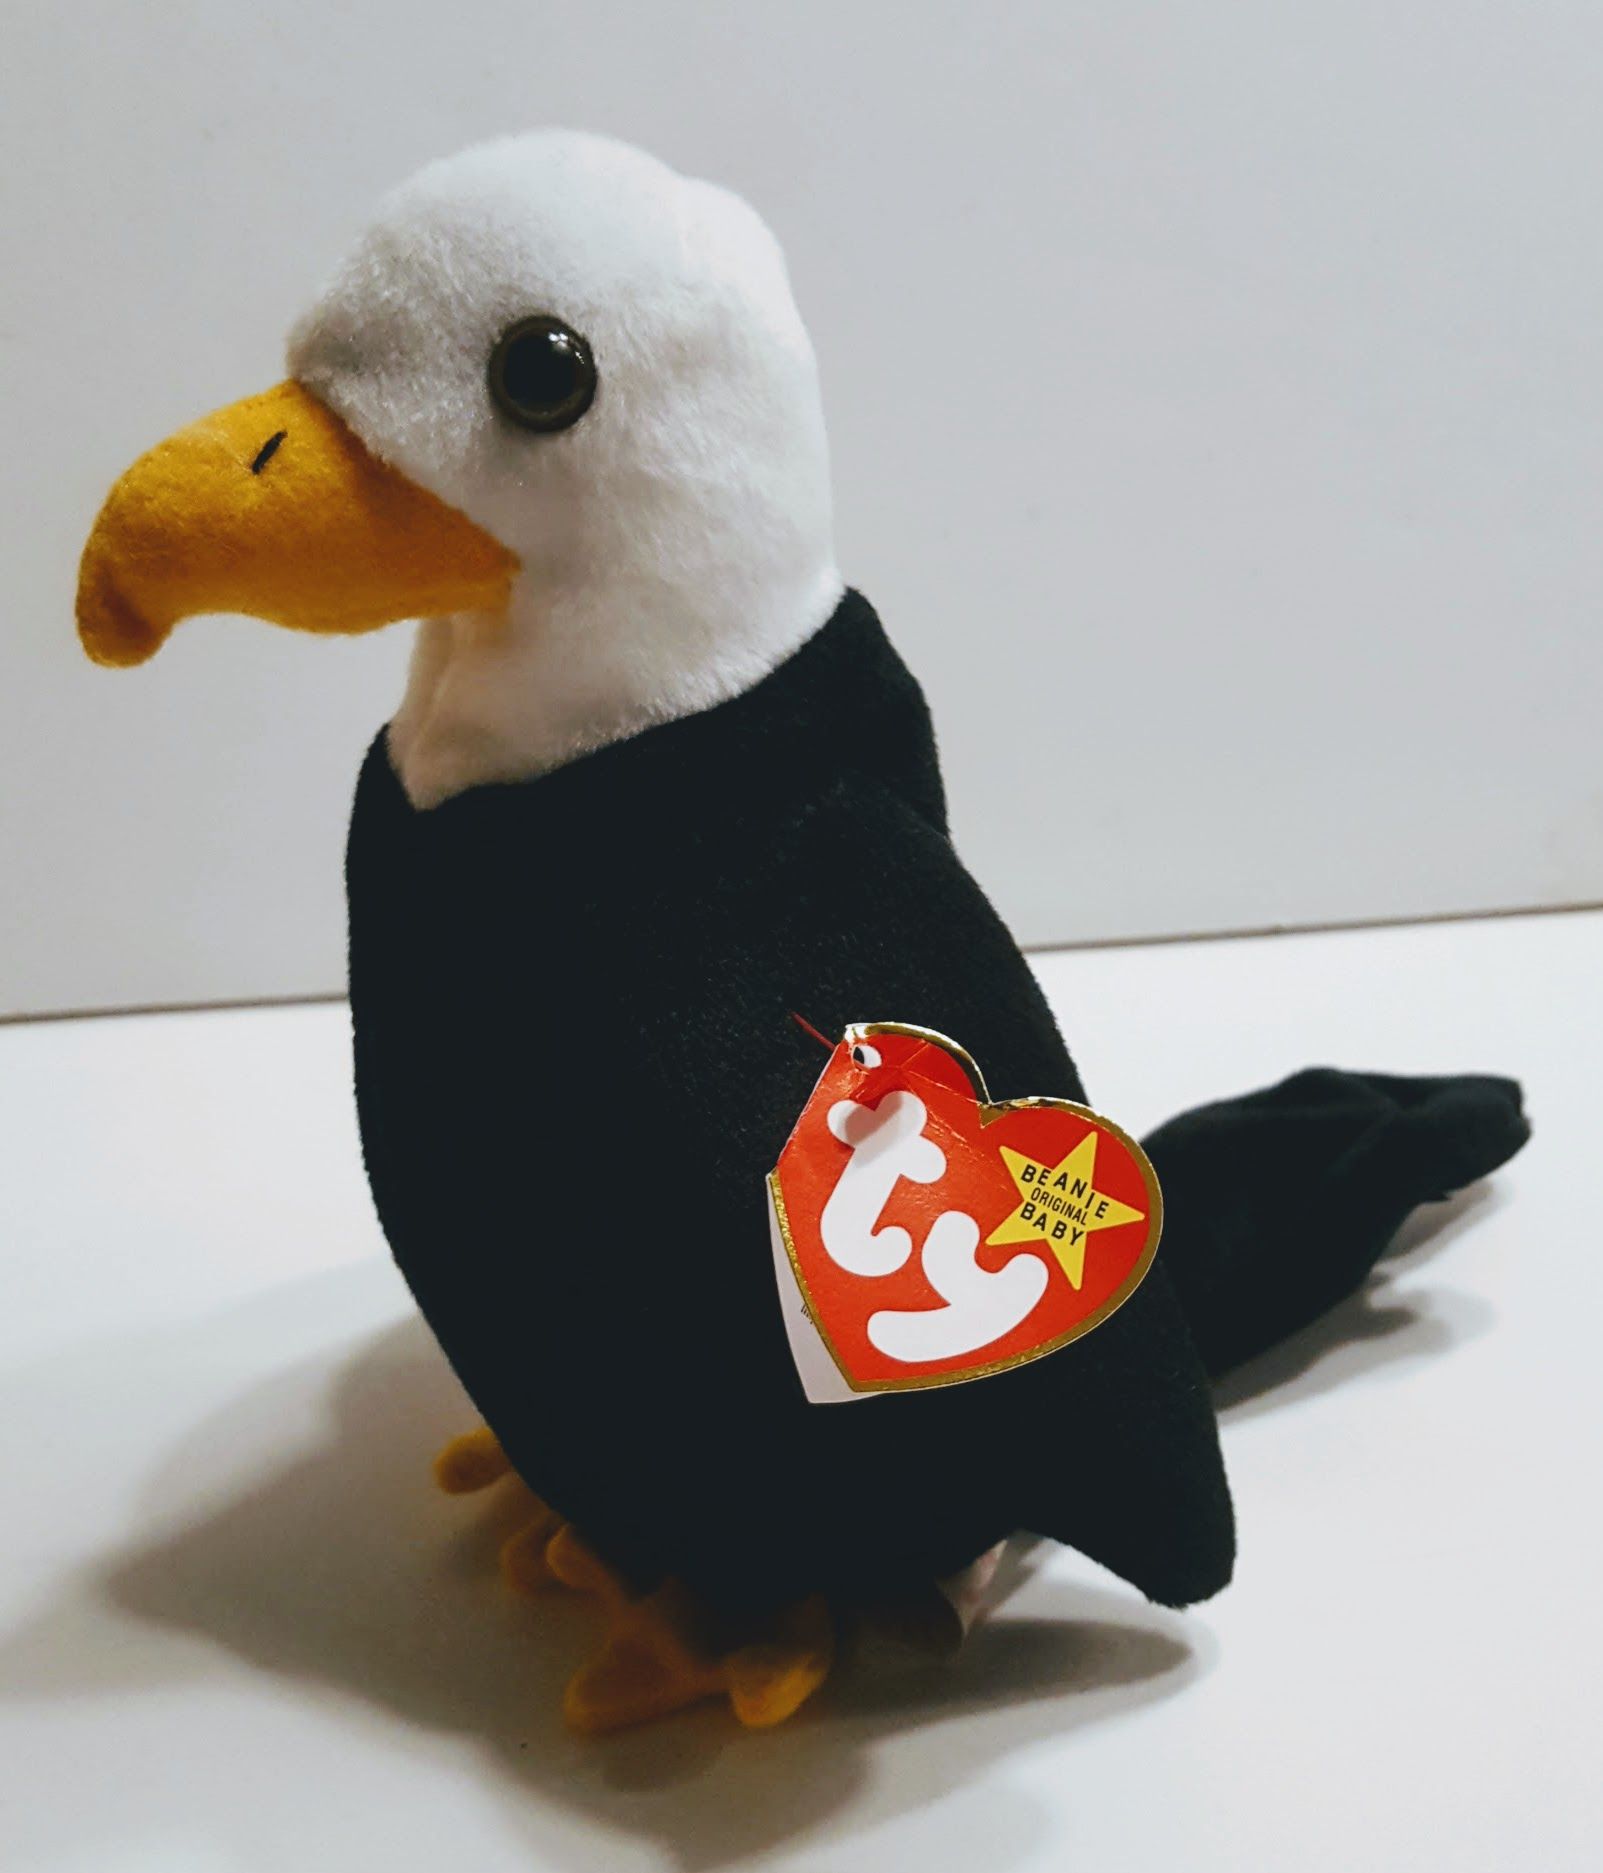 Ty Beanie Baby Baldy the Eagle with tag 2-17-96 style 4074